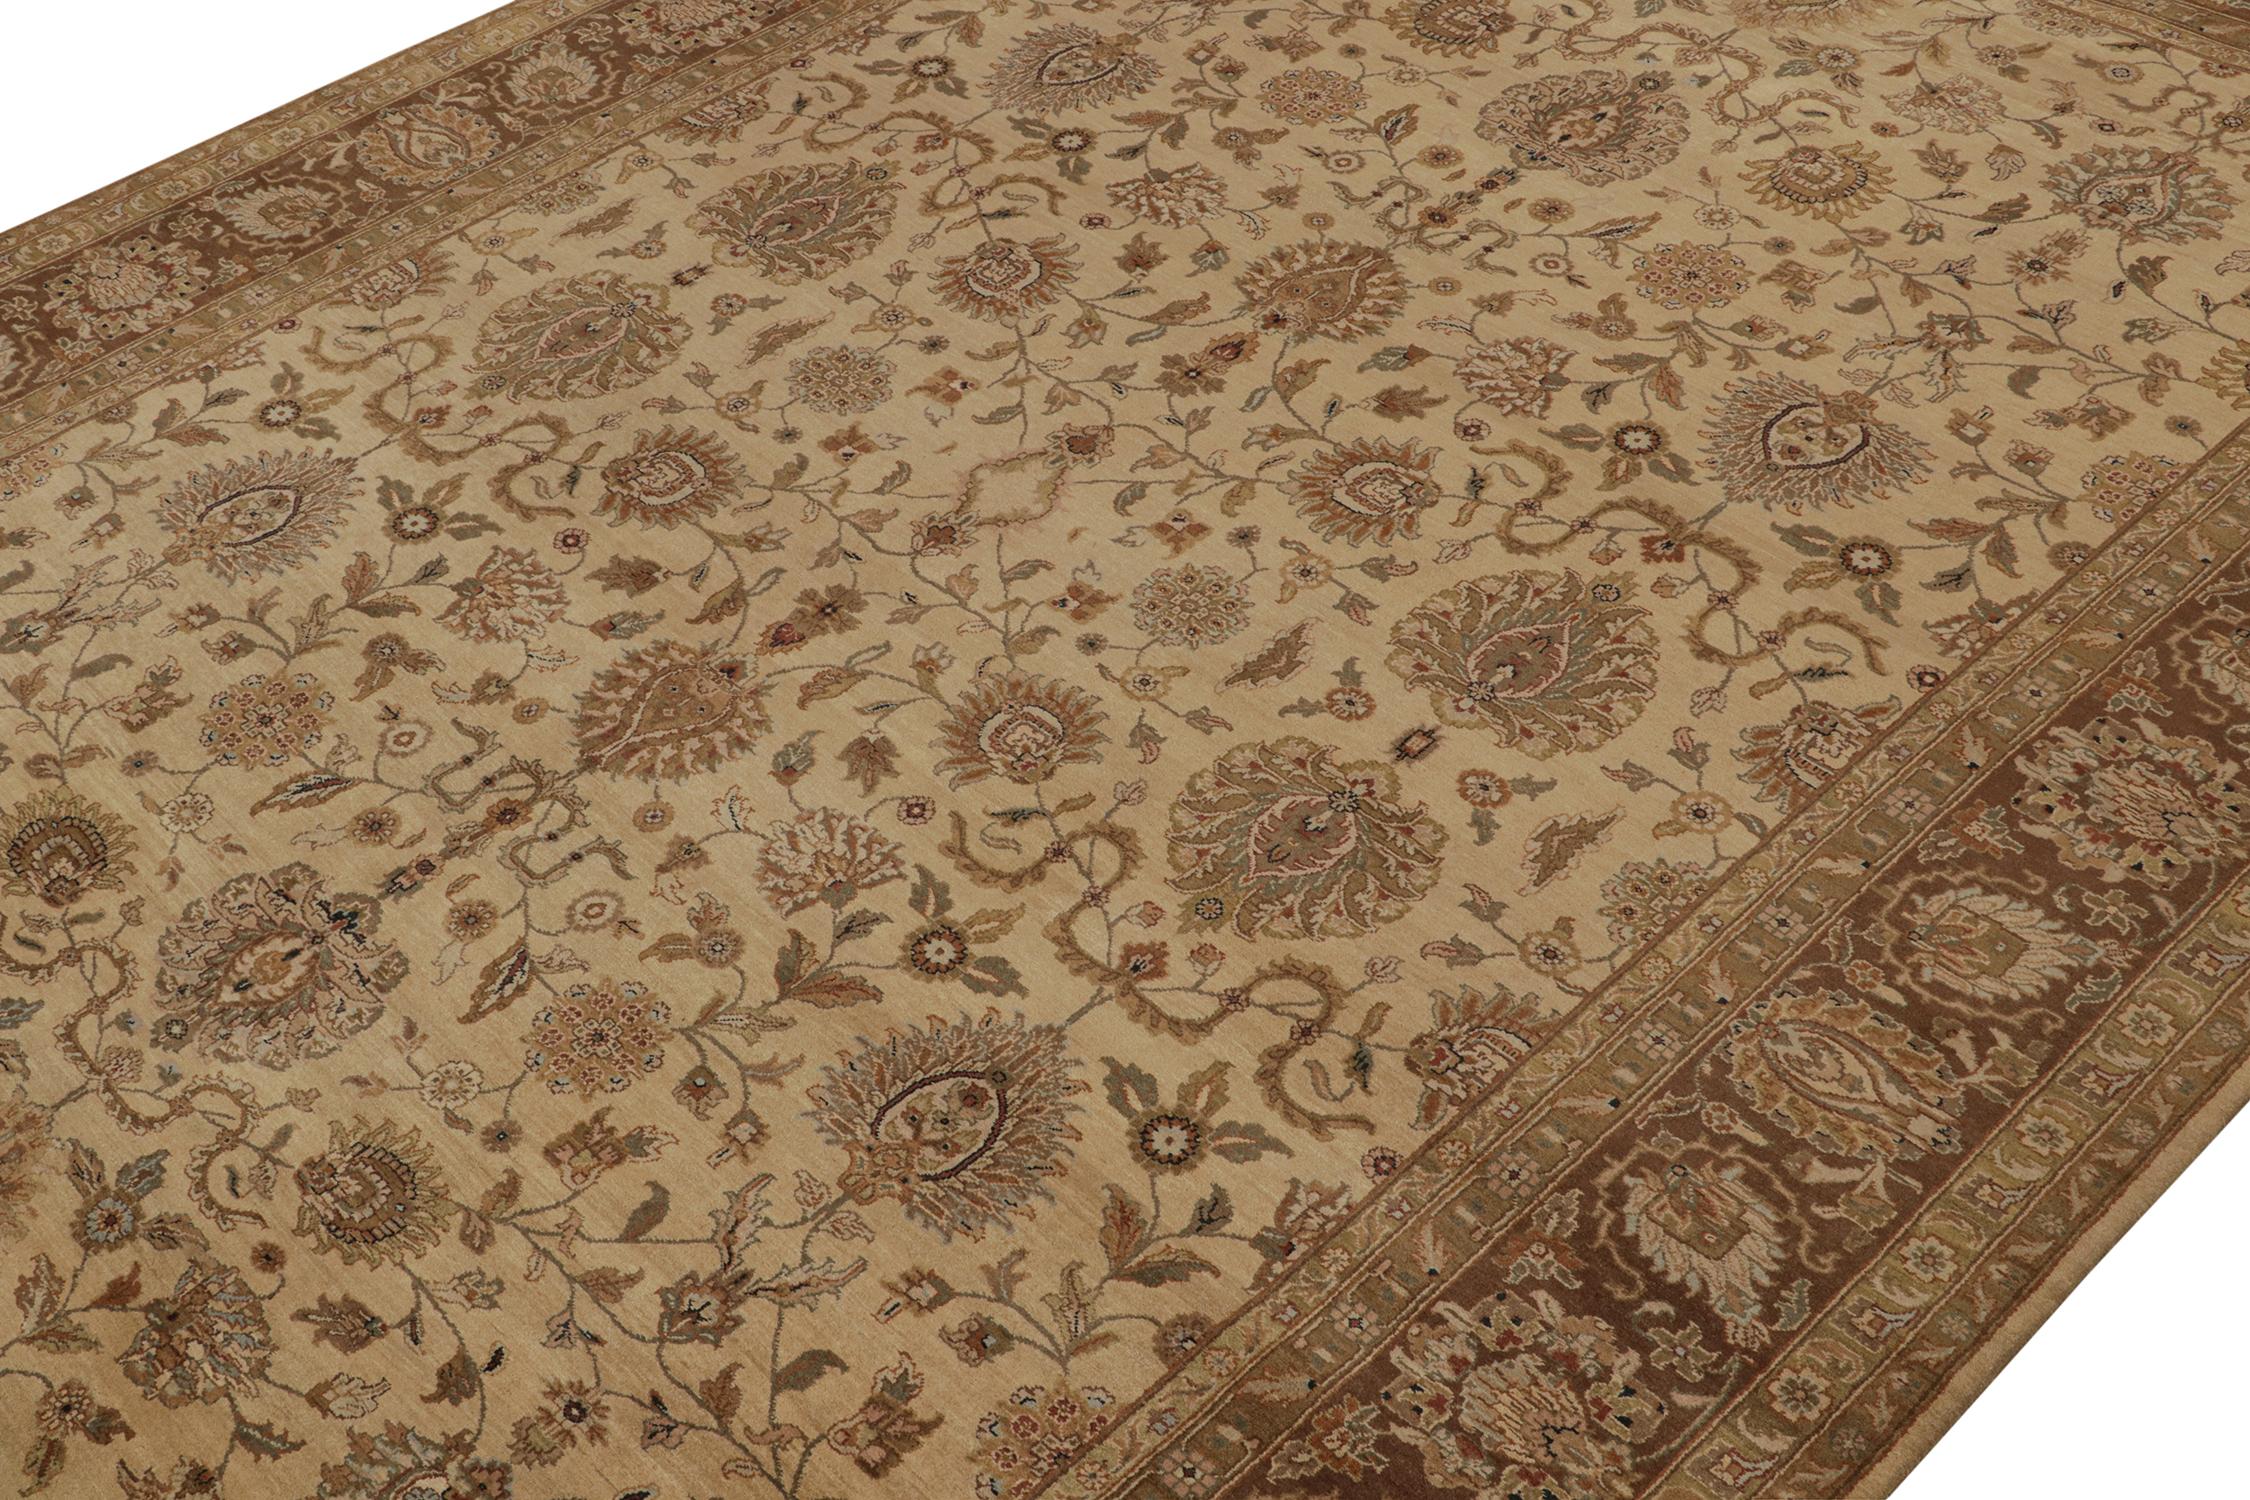 Indian Rug & Kilim’s Persian Style rug in Beige-Brown and Gold Floral Pattern For Sale